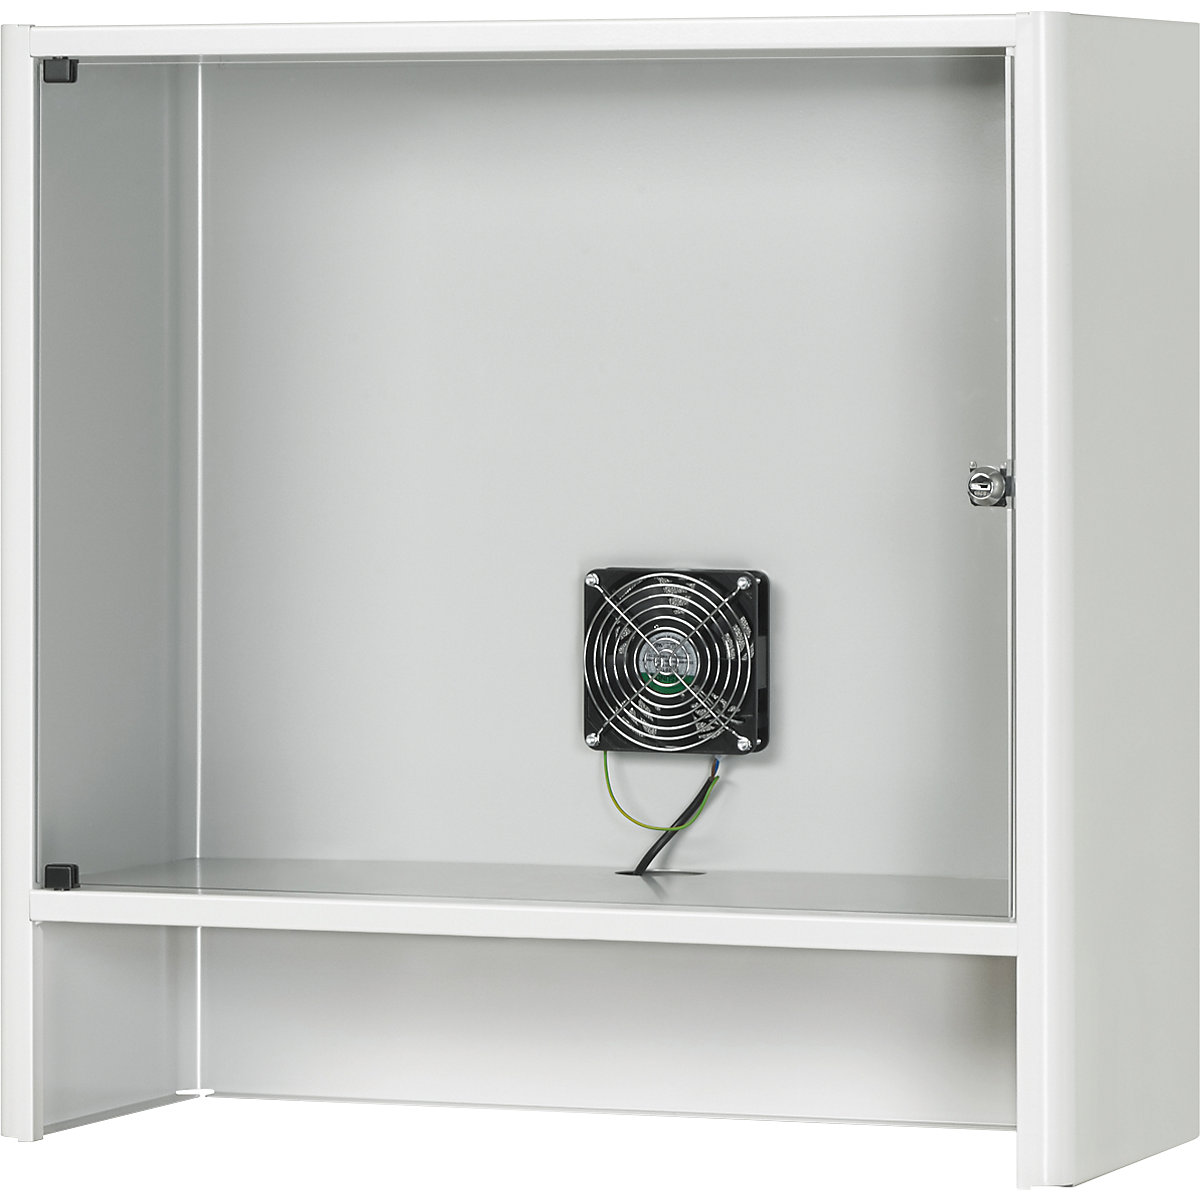 Monitor housing with integrated ventilation fan - RAU